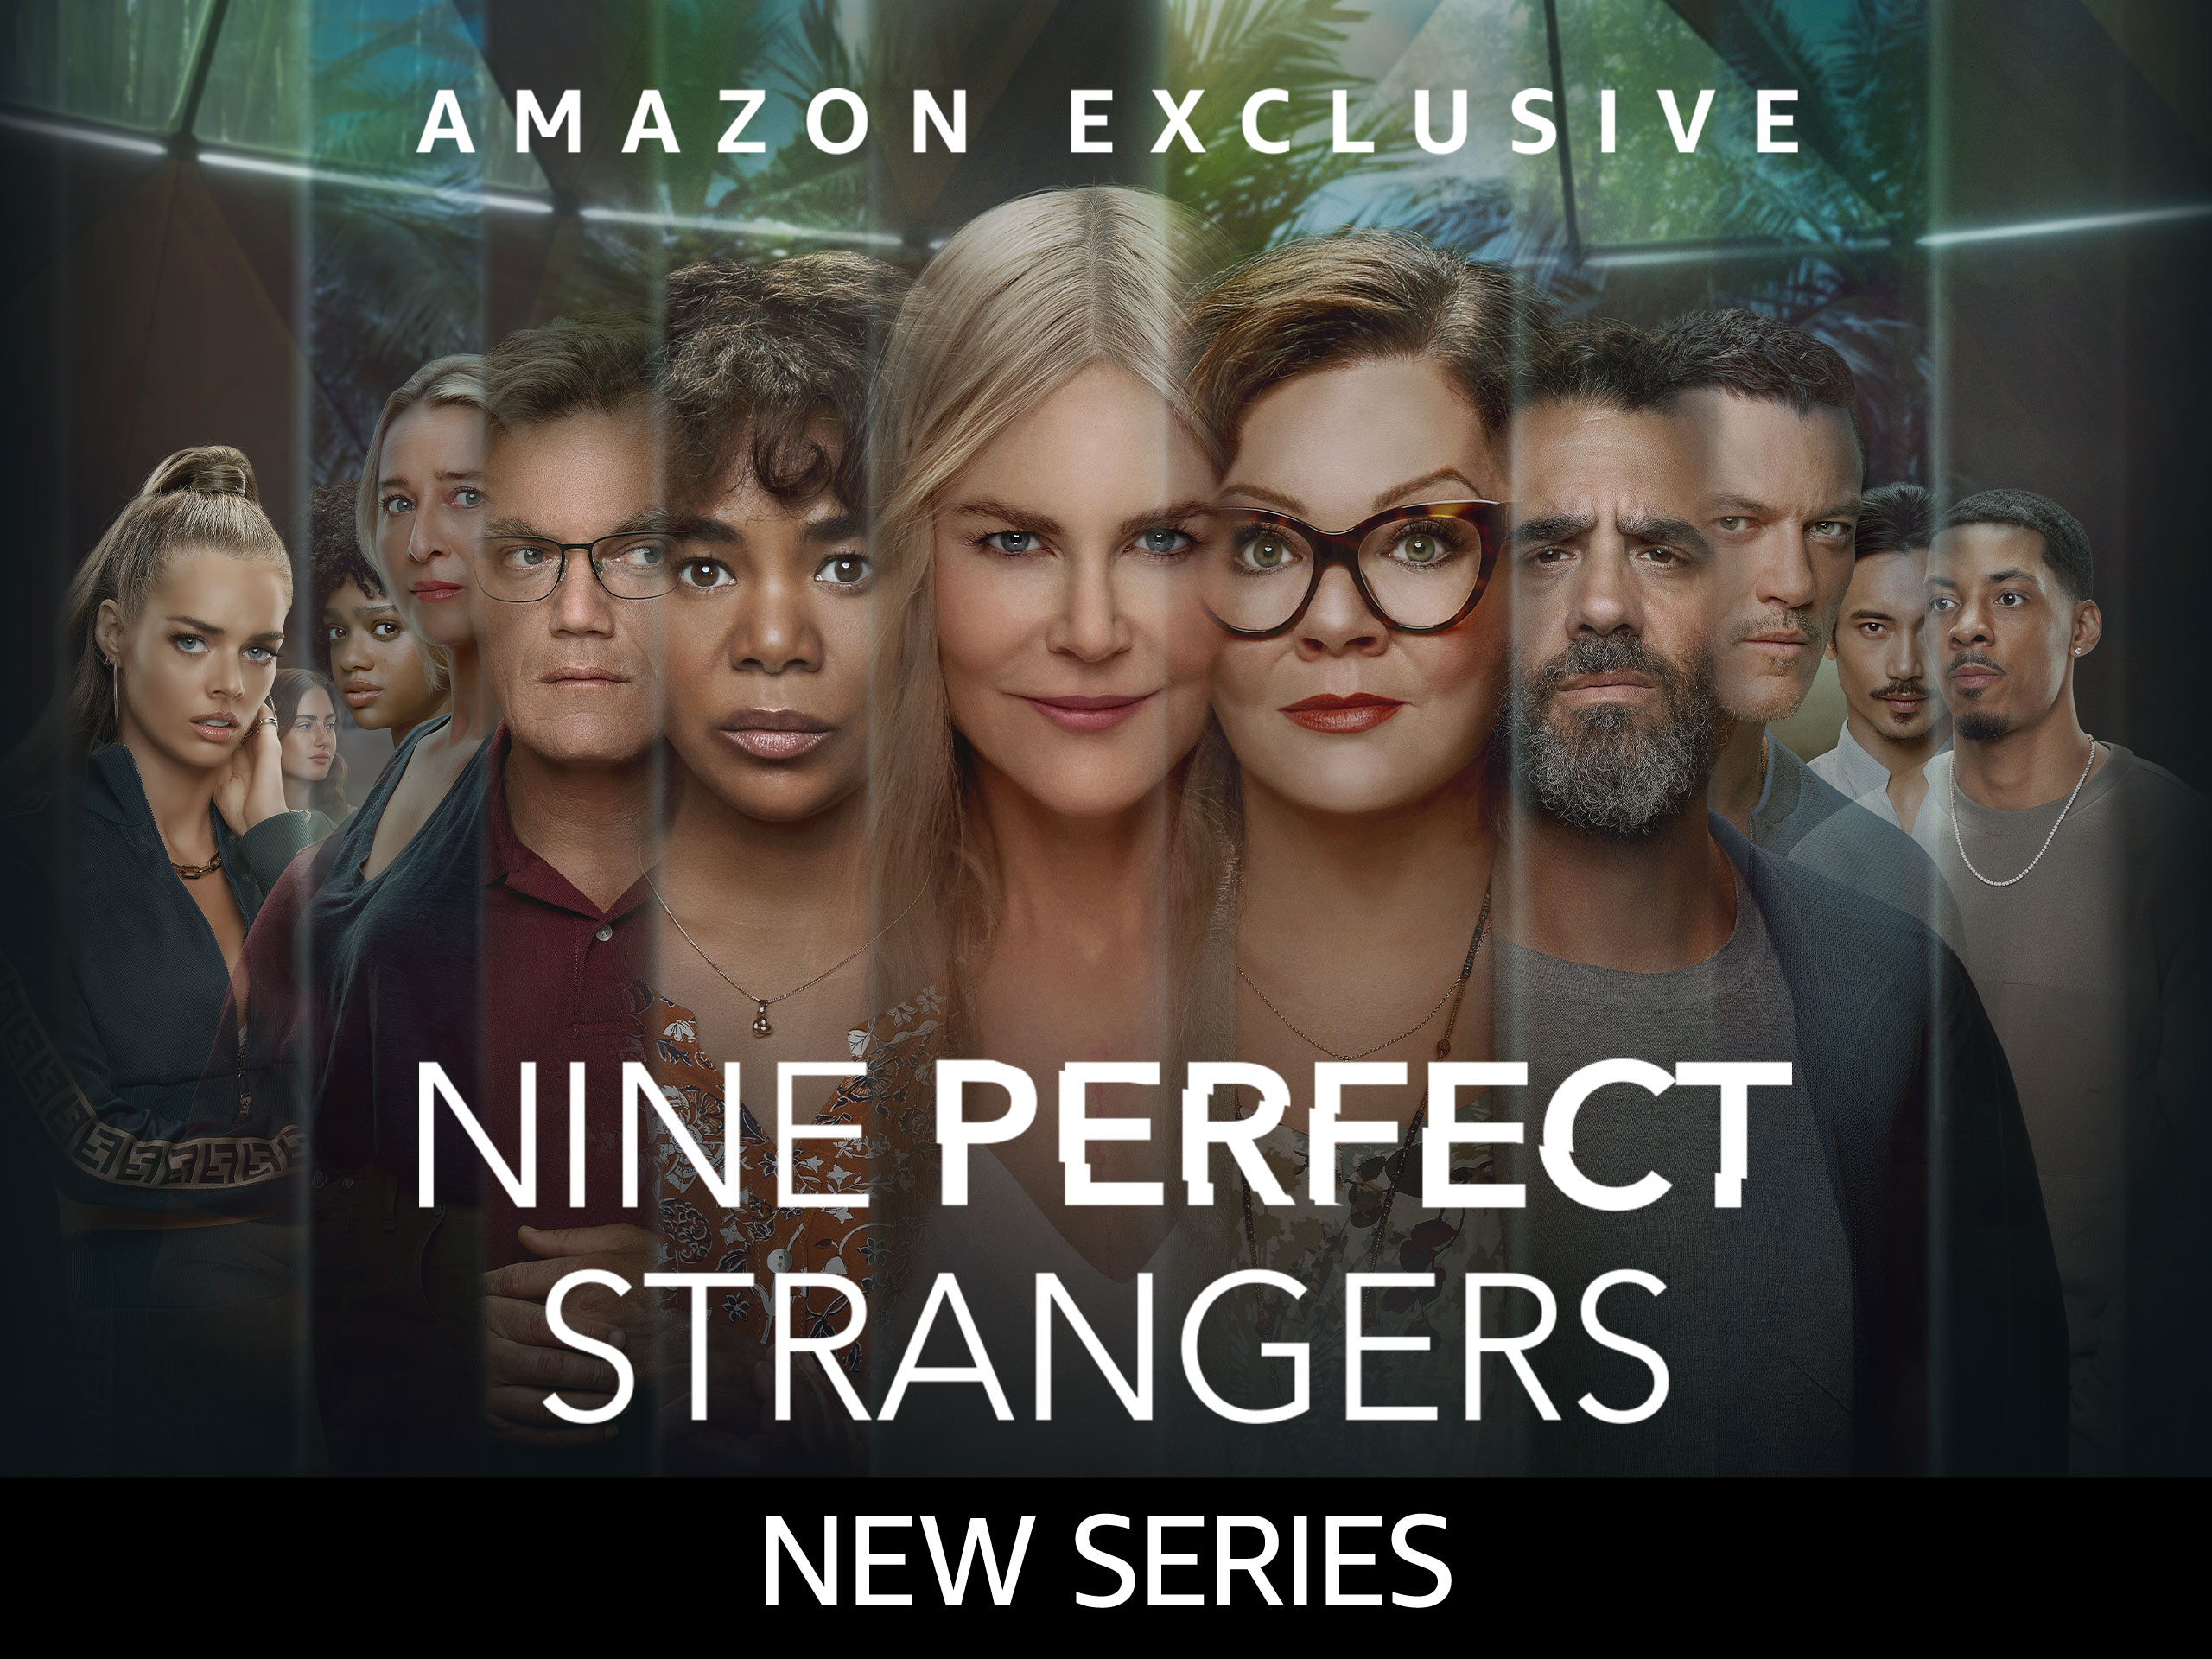 The new Hulu drama “Nine Perfect Strangers” was composed By An Algorithm?